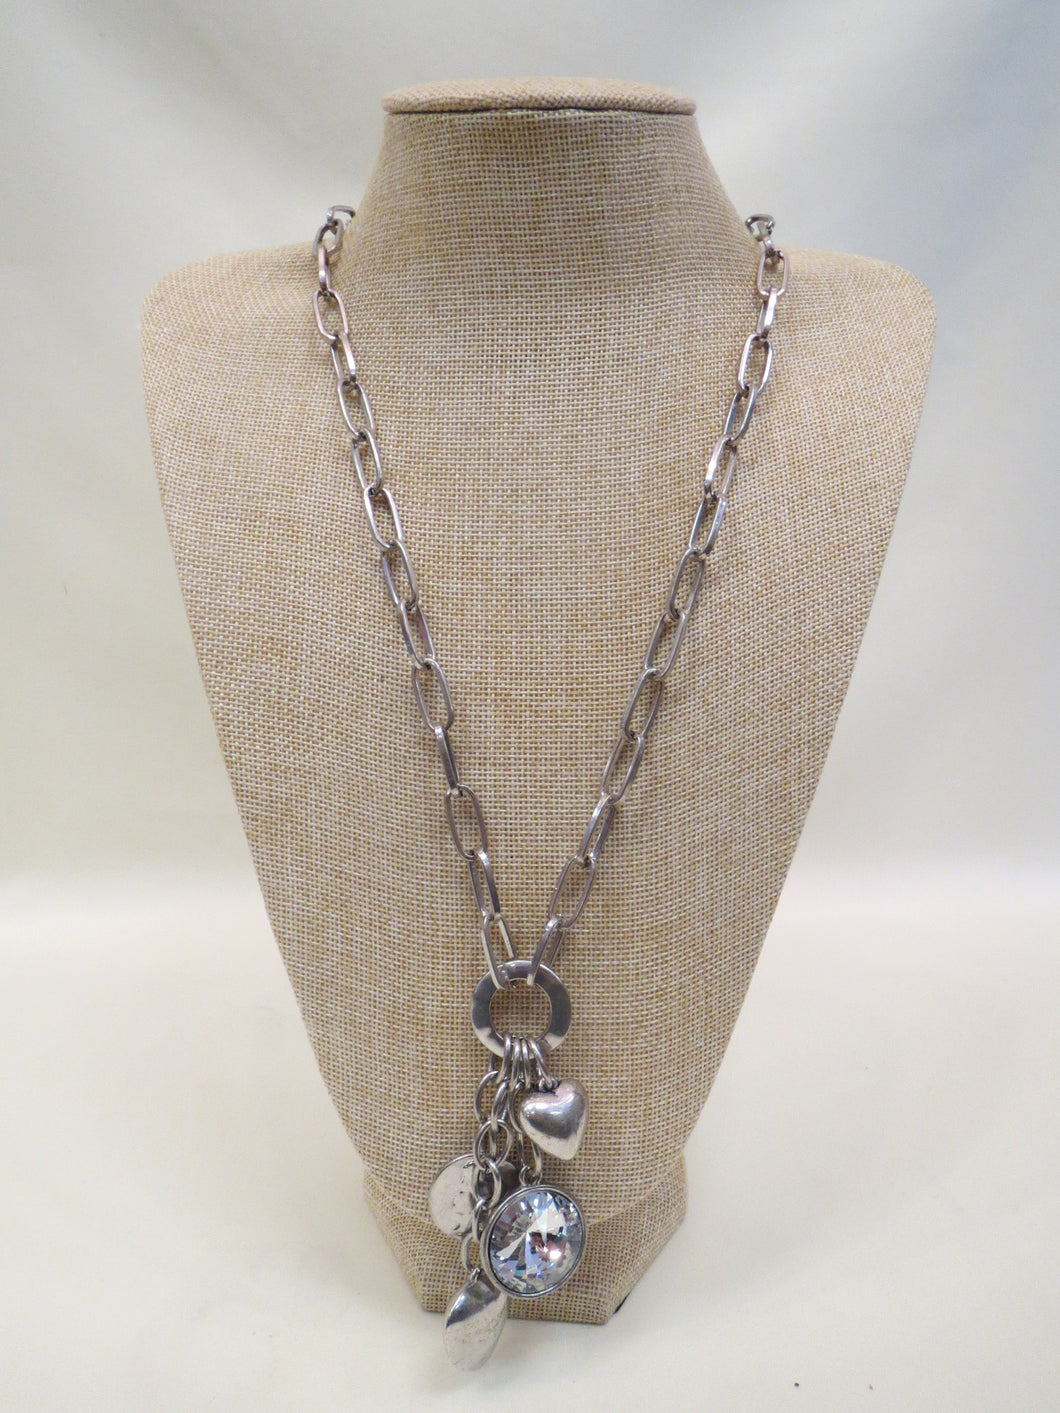 ADO Long Silver Chain Necklace with Pendant | All Dec'd Out